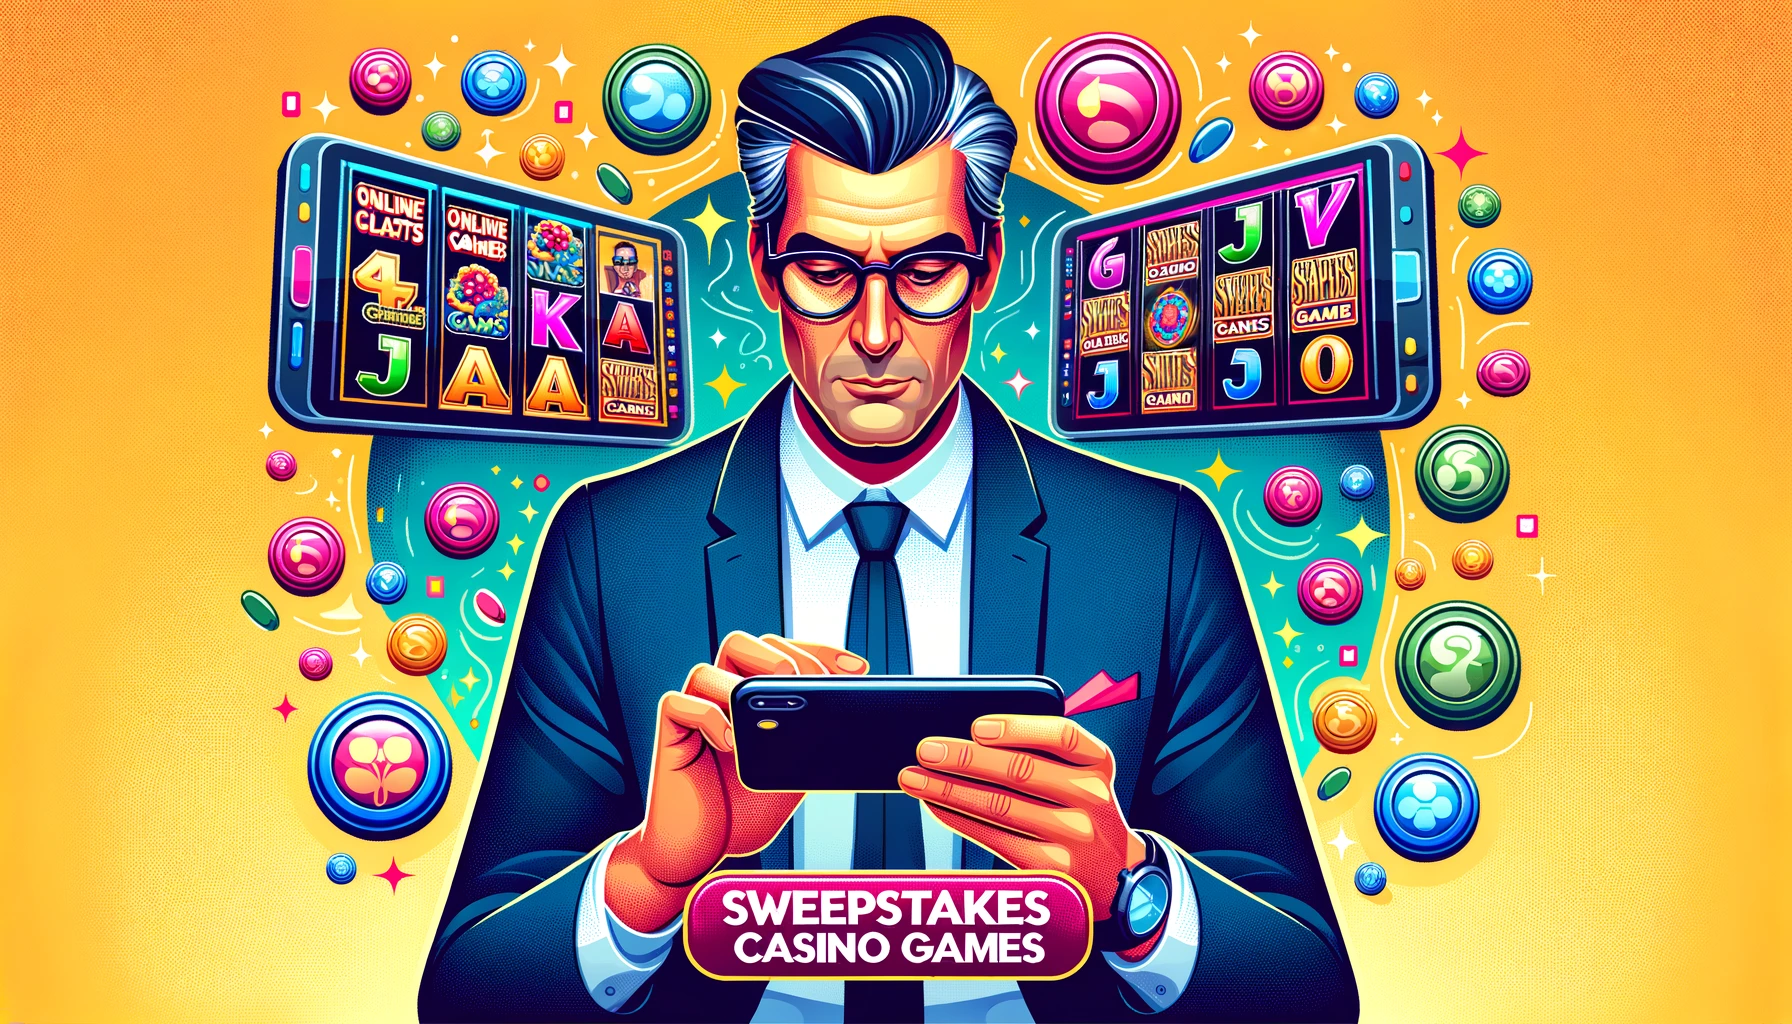 Sweepstakes casinos games in the US